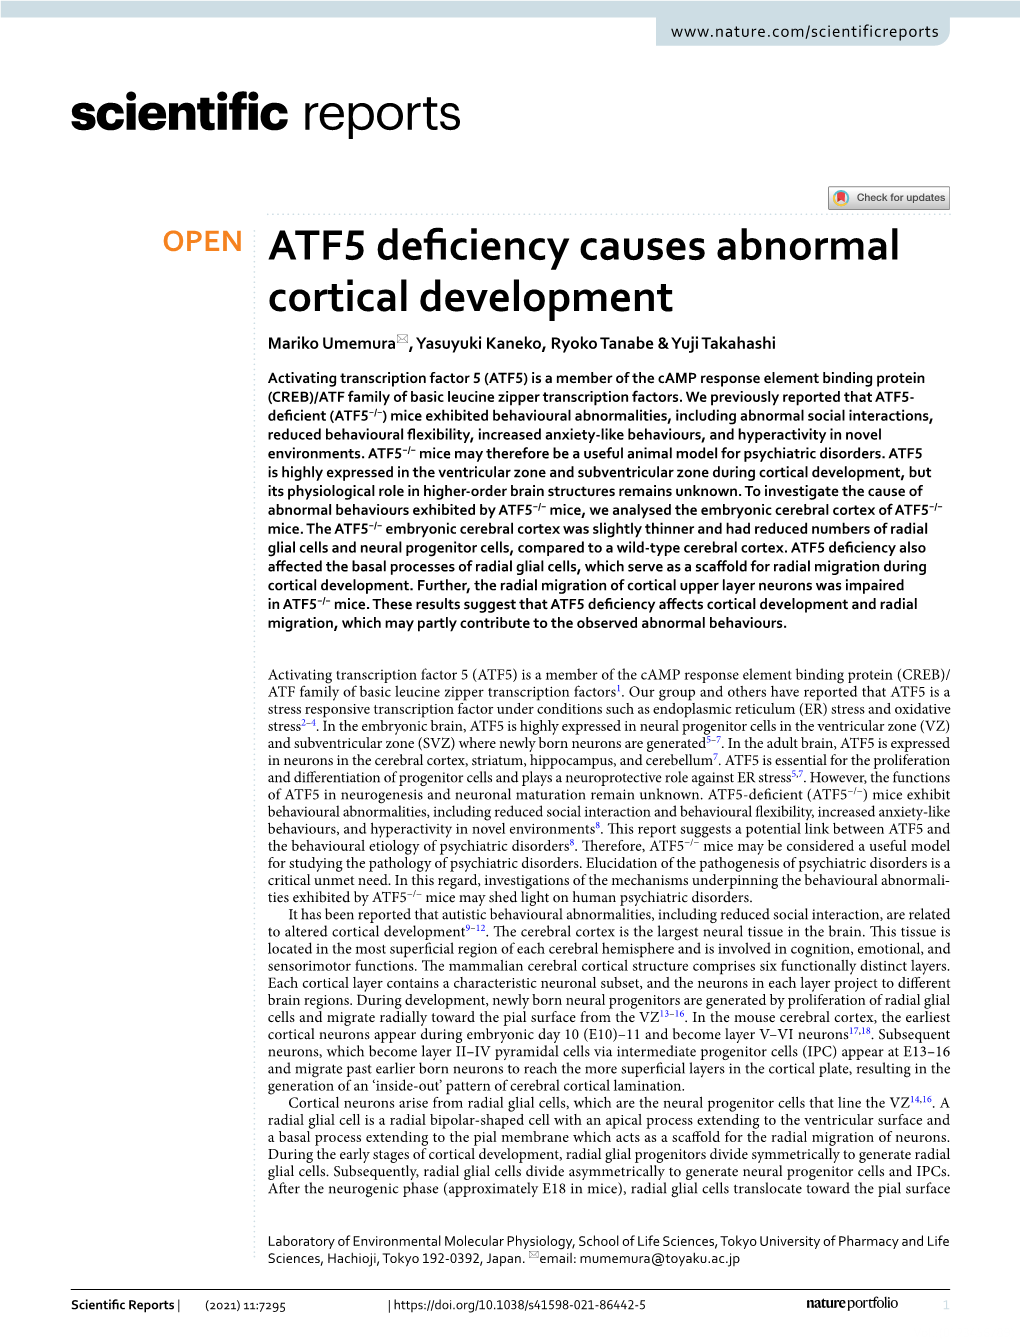 ATF5 Deficiency Causes Abnormal Cortical Development